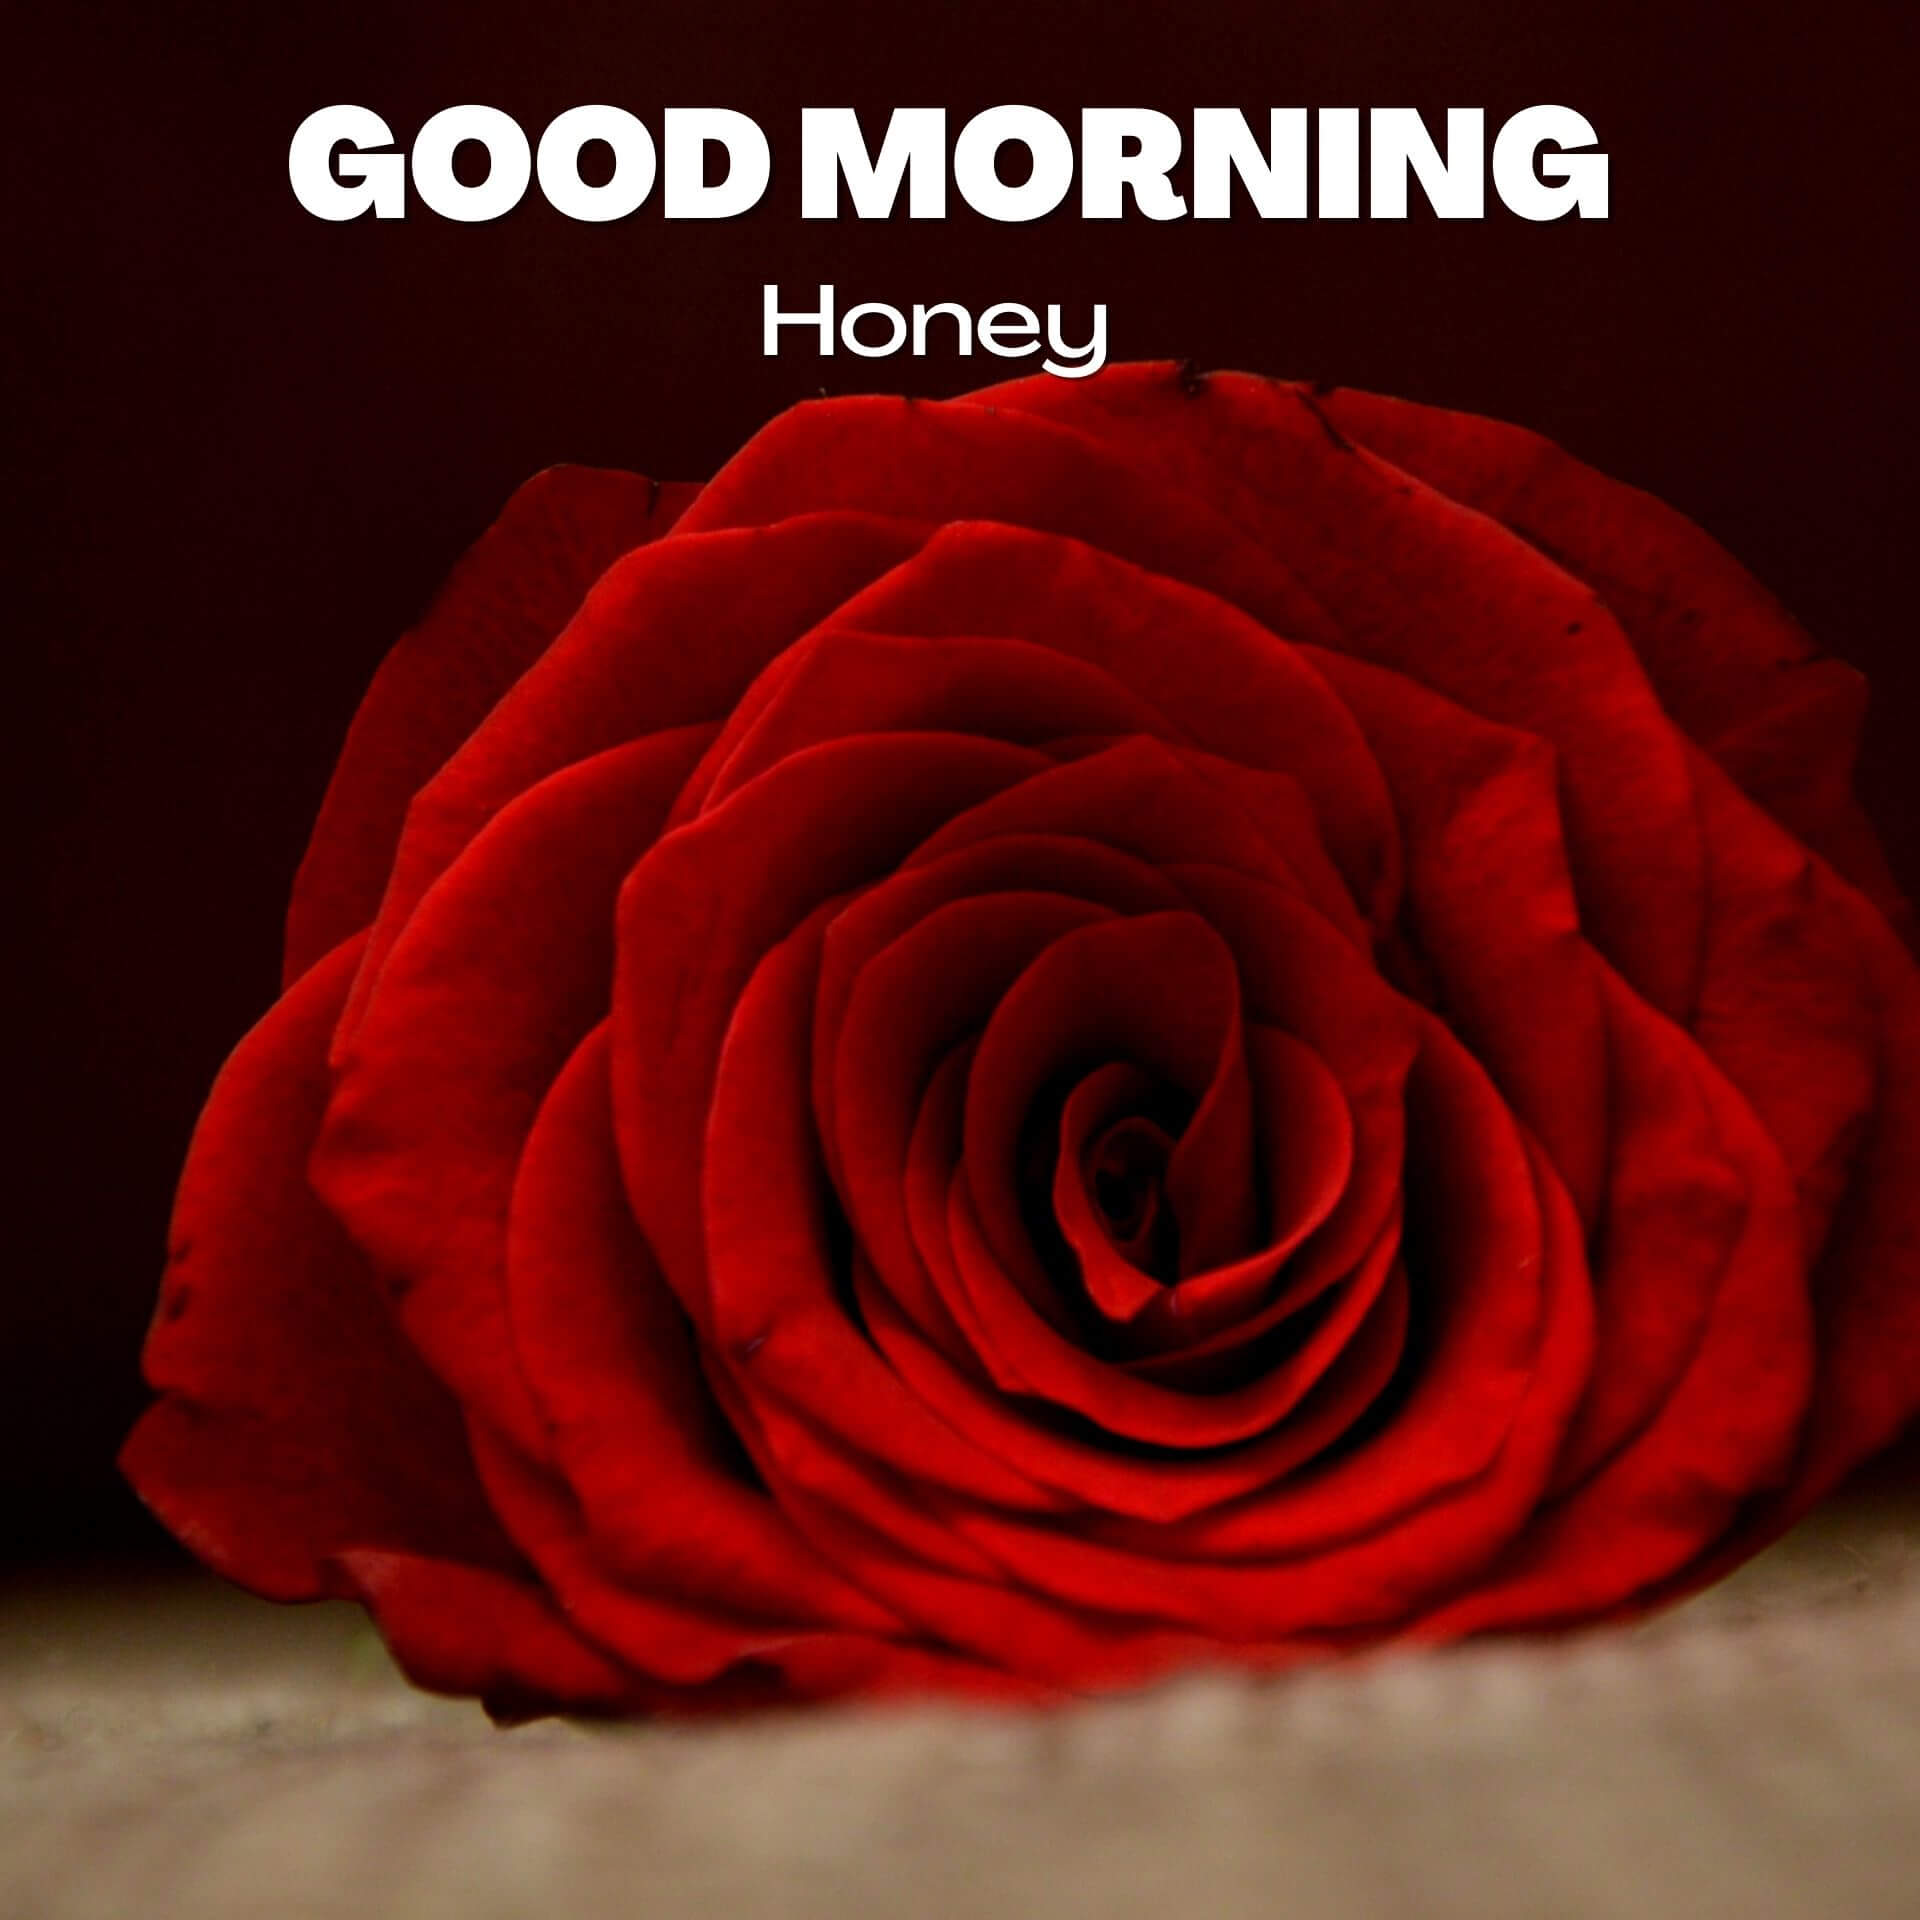 Good Morning Honey Wallpaper Images With Red Rose